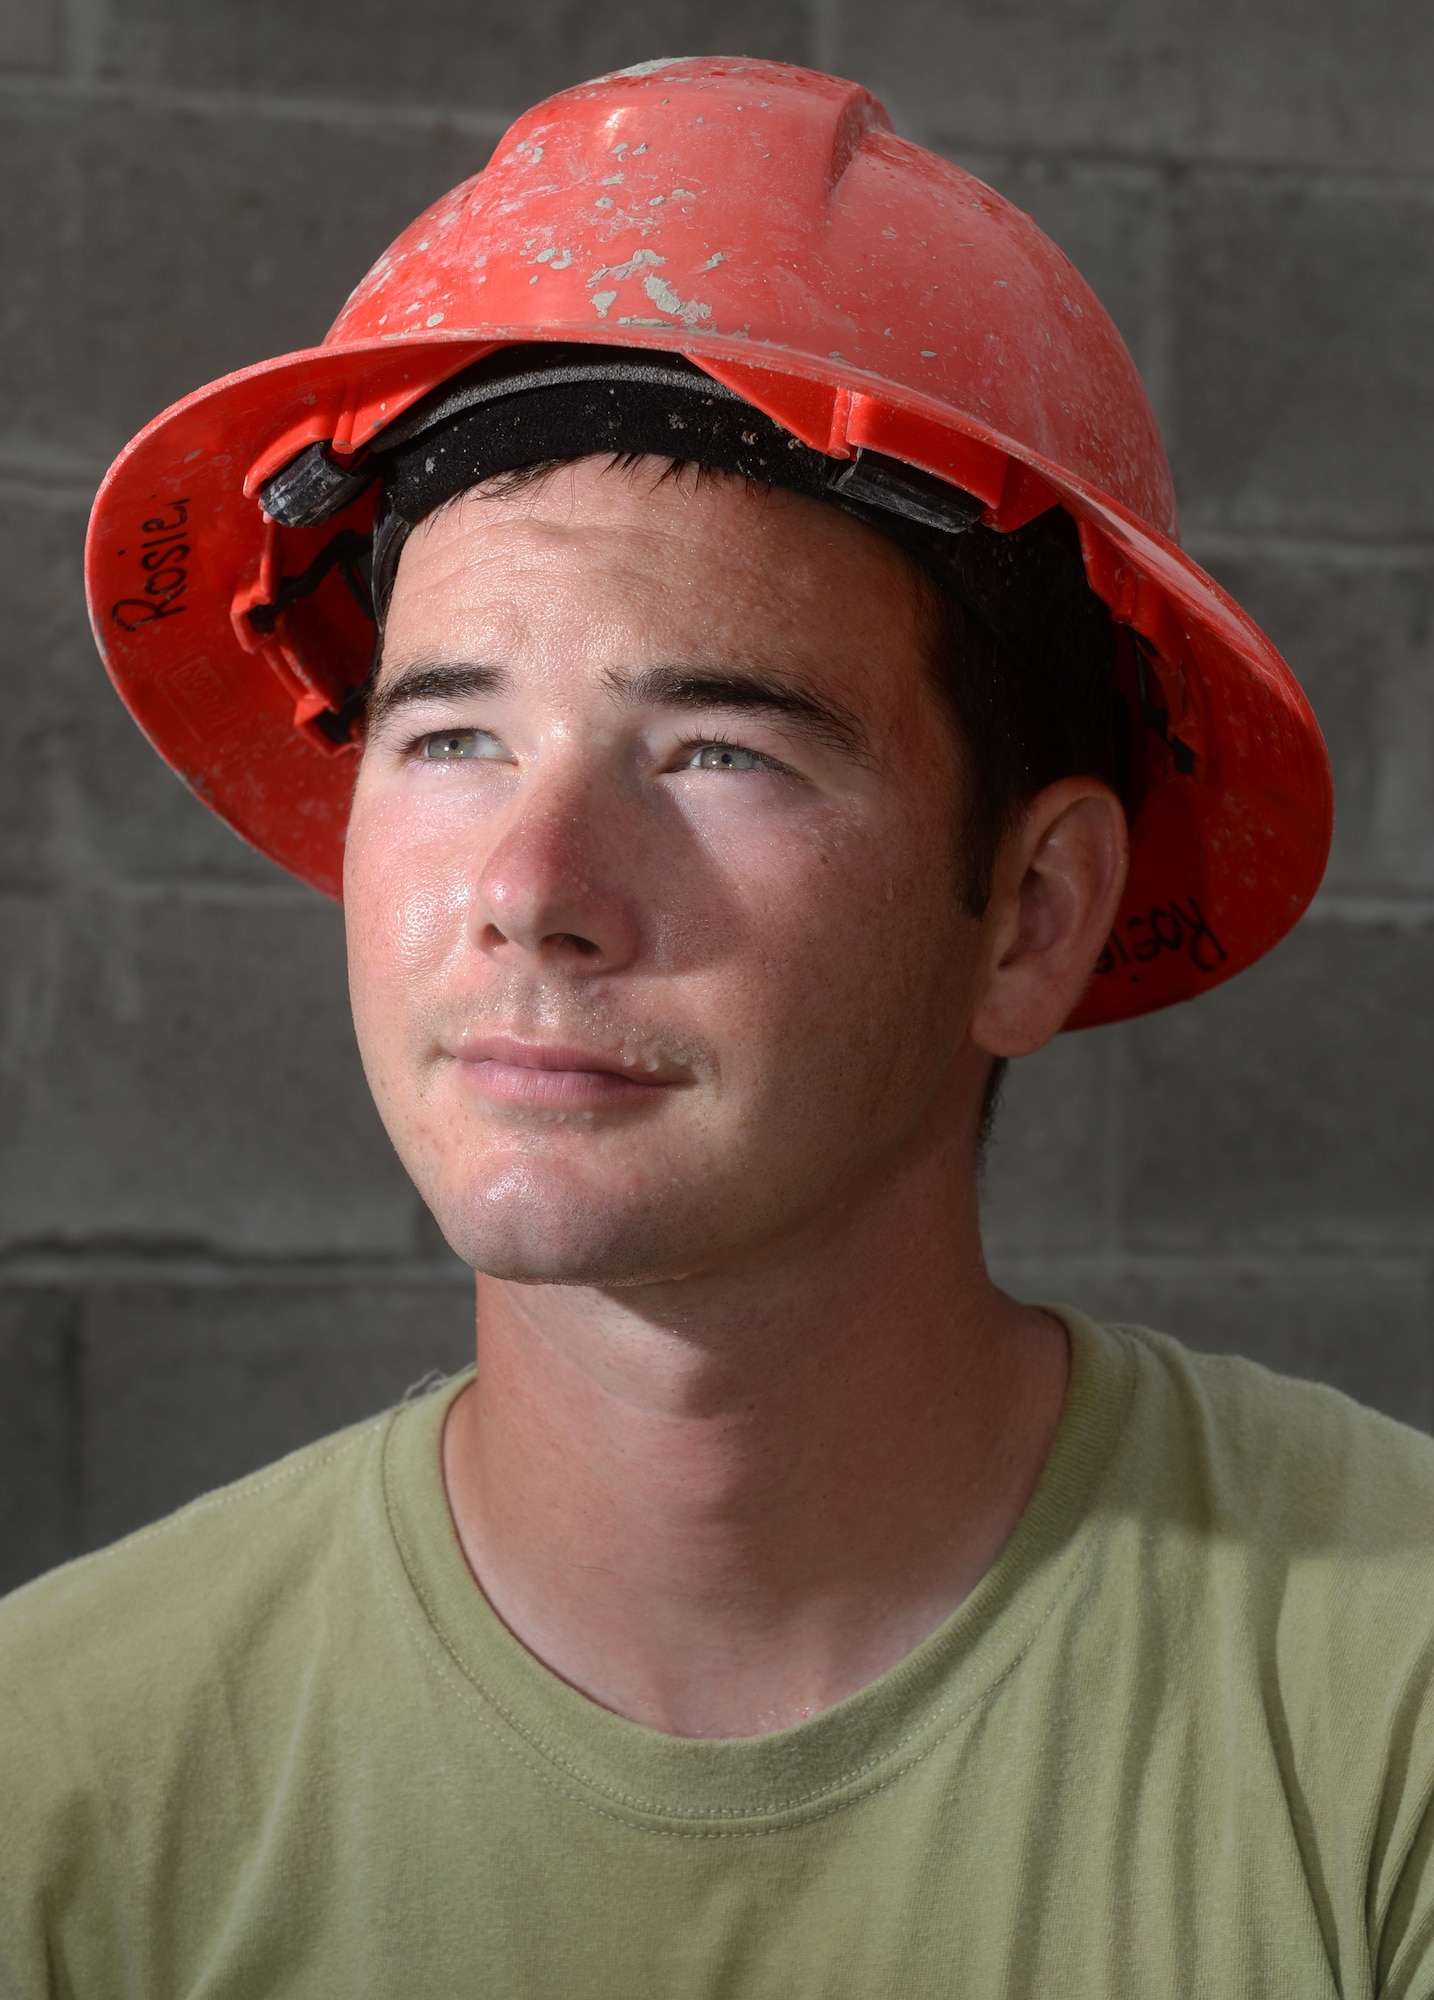 U.S. Air Force Staff Sgt. Nathan Rosier, 823rd Expeditionary RED HORSE Squadron structural craftsman,  poses for a photo at the Gabriela Mistral construction site in the village of Ocotes Alto near Trujillo, Honduras, June 24, 2015. Rosier is one of many personnel working on a new two-classroom schoolhouse, which is part of NEW HORIZONS Honduras 2015, an annual humanitarian and training exercise put on by U.S. Southern Command. NEW HORIZONS was launched in the 1980s and is an annual joint humanitarian assistance exercise that U.S. Southern Command conducts with a partner nation in Central America, South America or the Caribbean. The exercise improves joint training readiness of U.S. and partner nation civil engineers, medical professionals and support personnel through humanitarian assistance activities. (U.S. Air Force photo by Capt. David J. Murphy/Released)